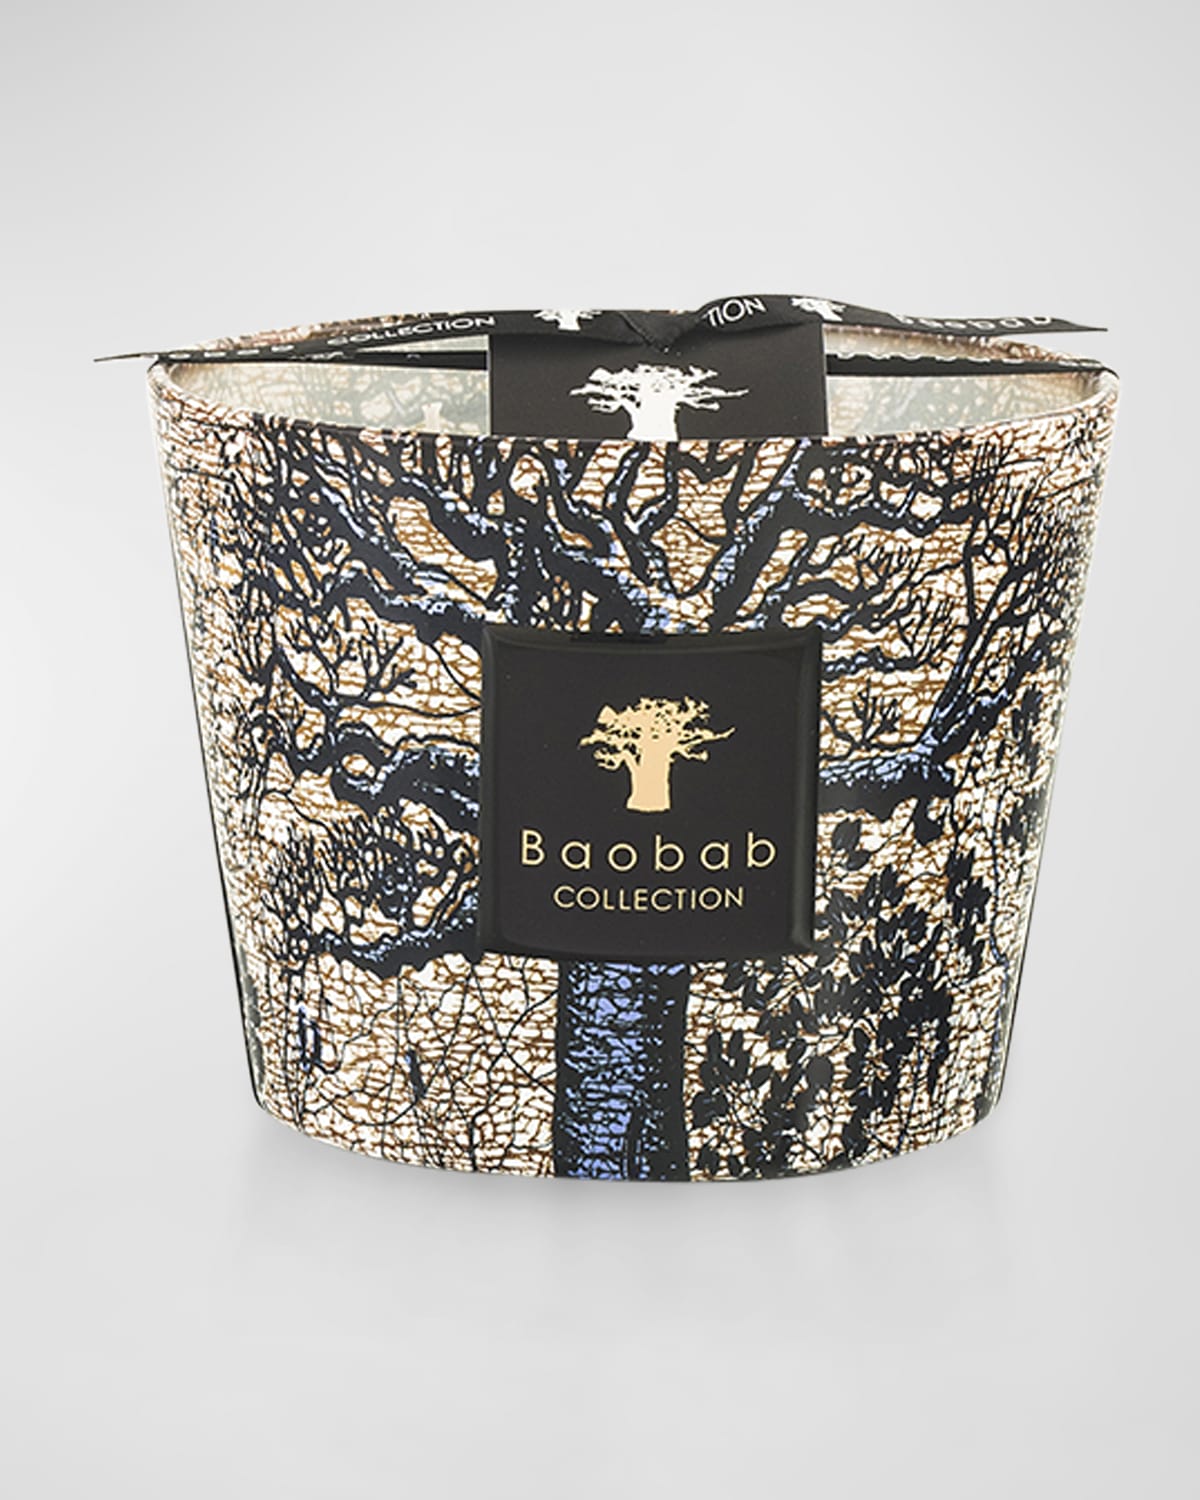 Baobab Collection Sacred Trees Seguela 4-wick Max10 Candle, 47.6 Oz.